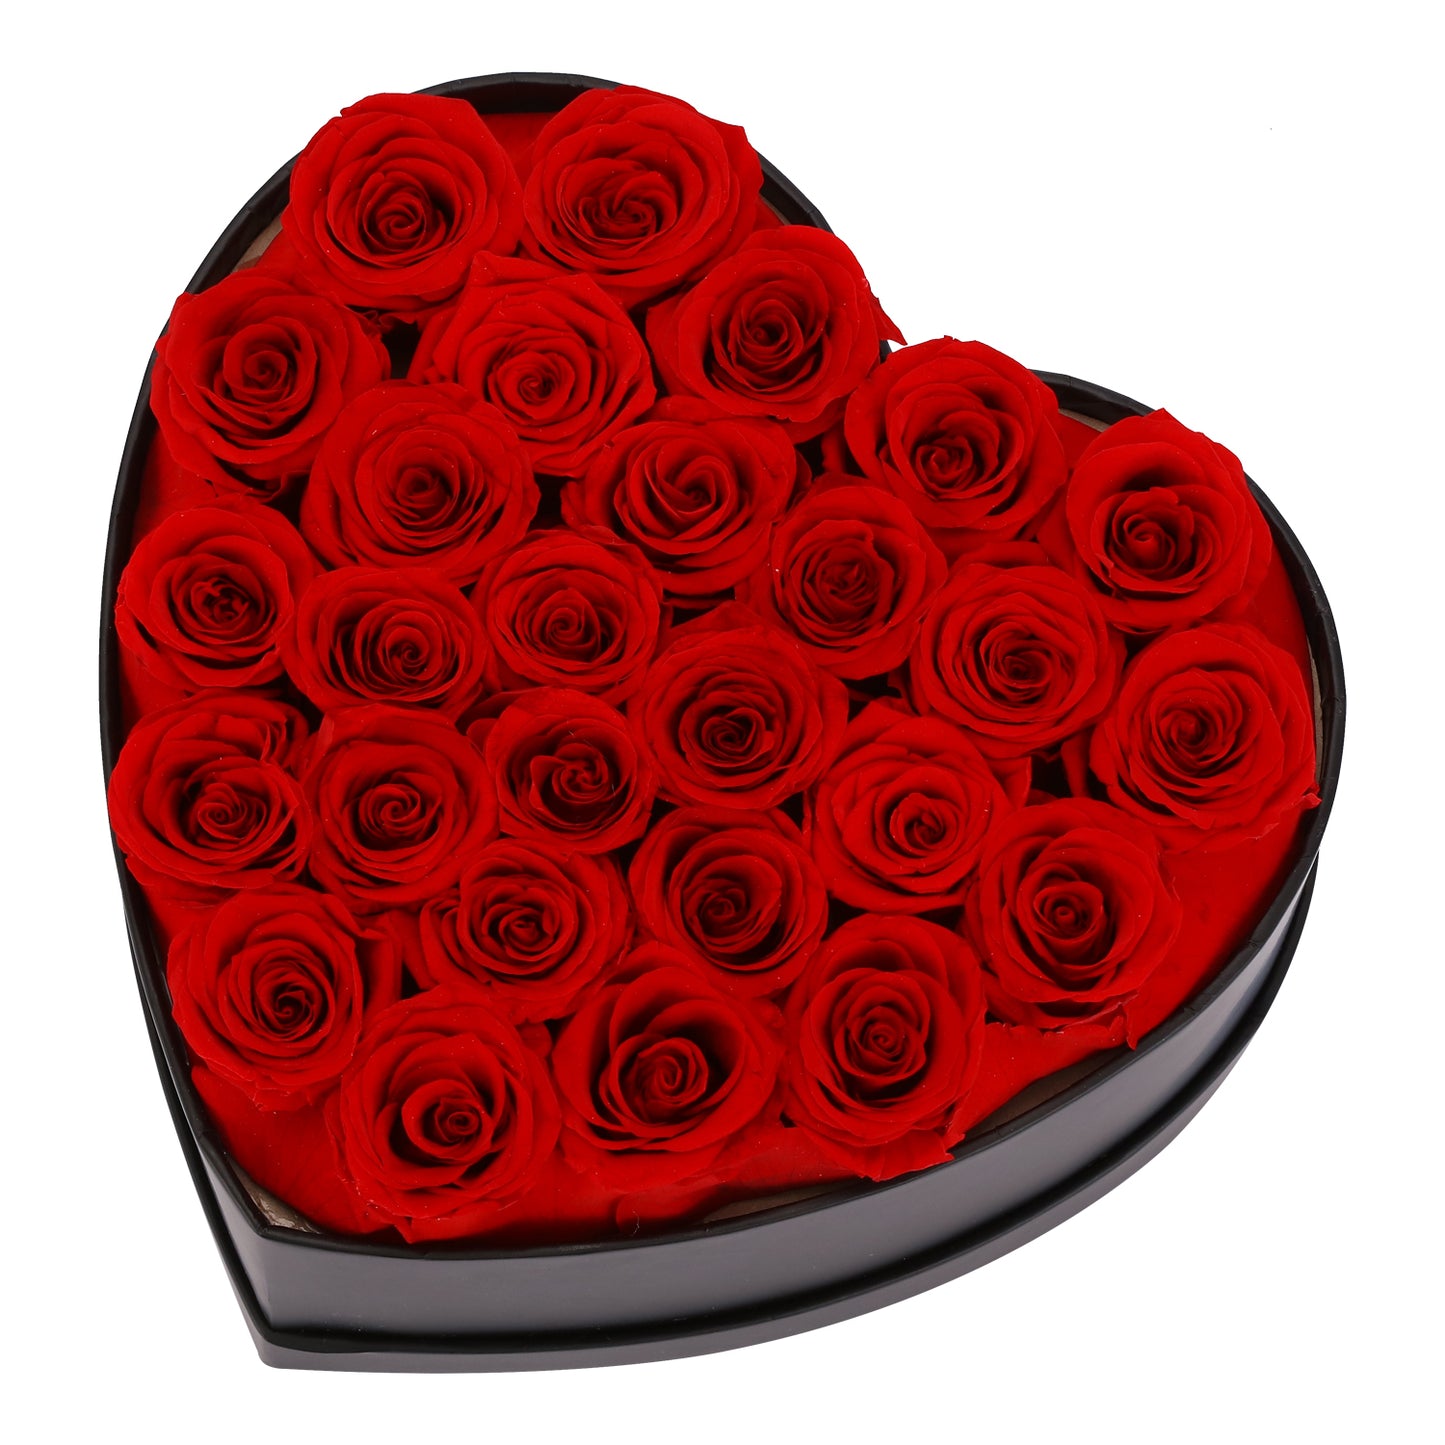 27 PCS Preserved Rose in Heart Box